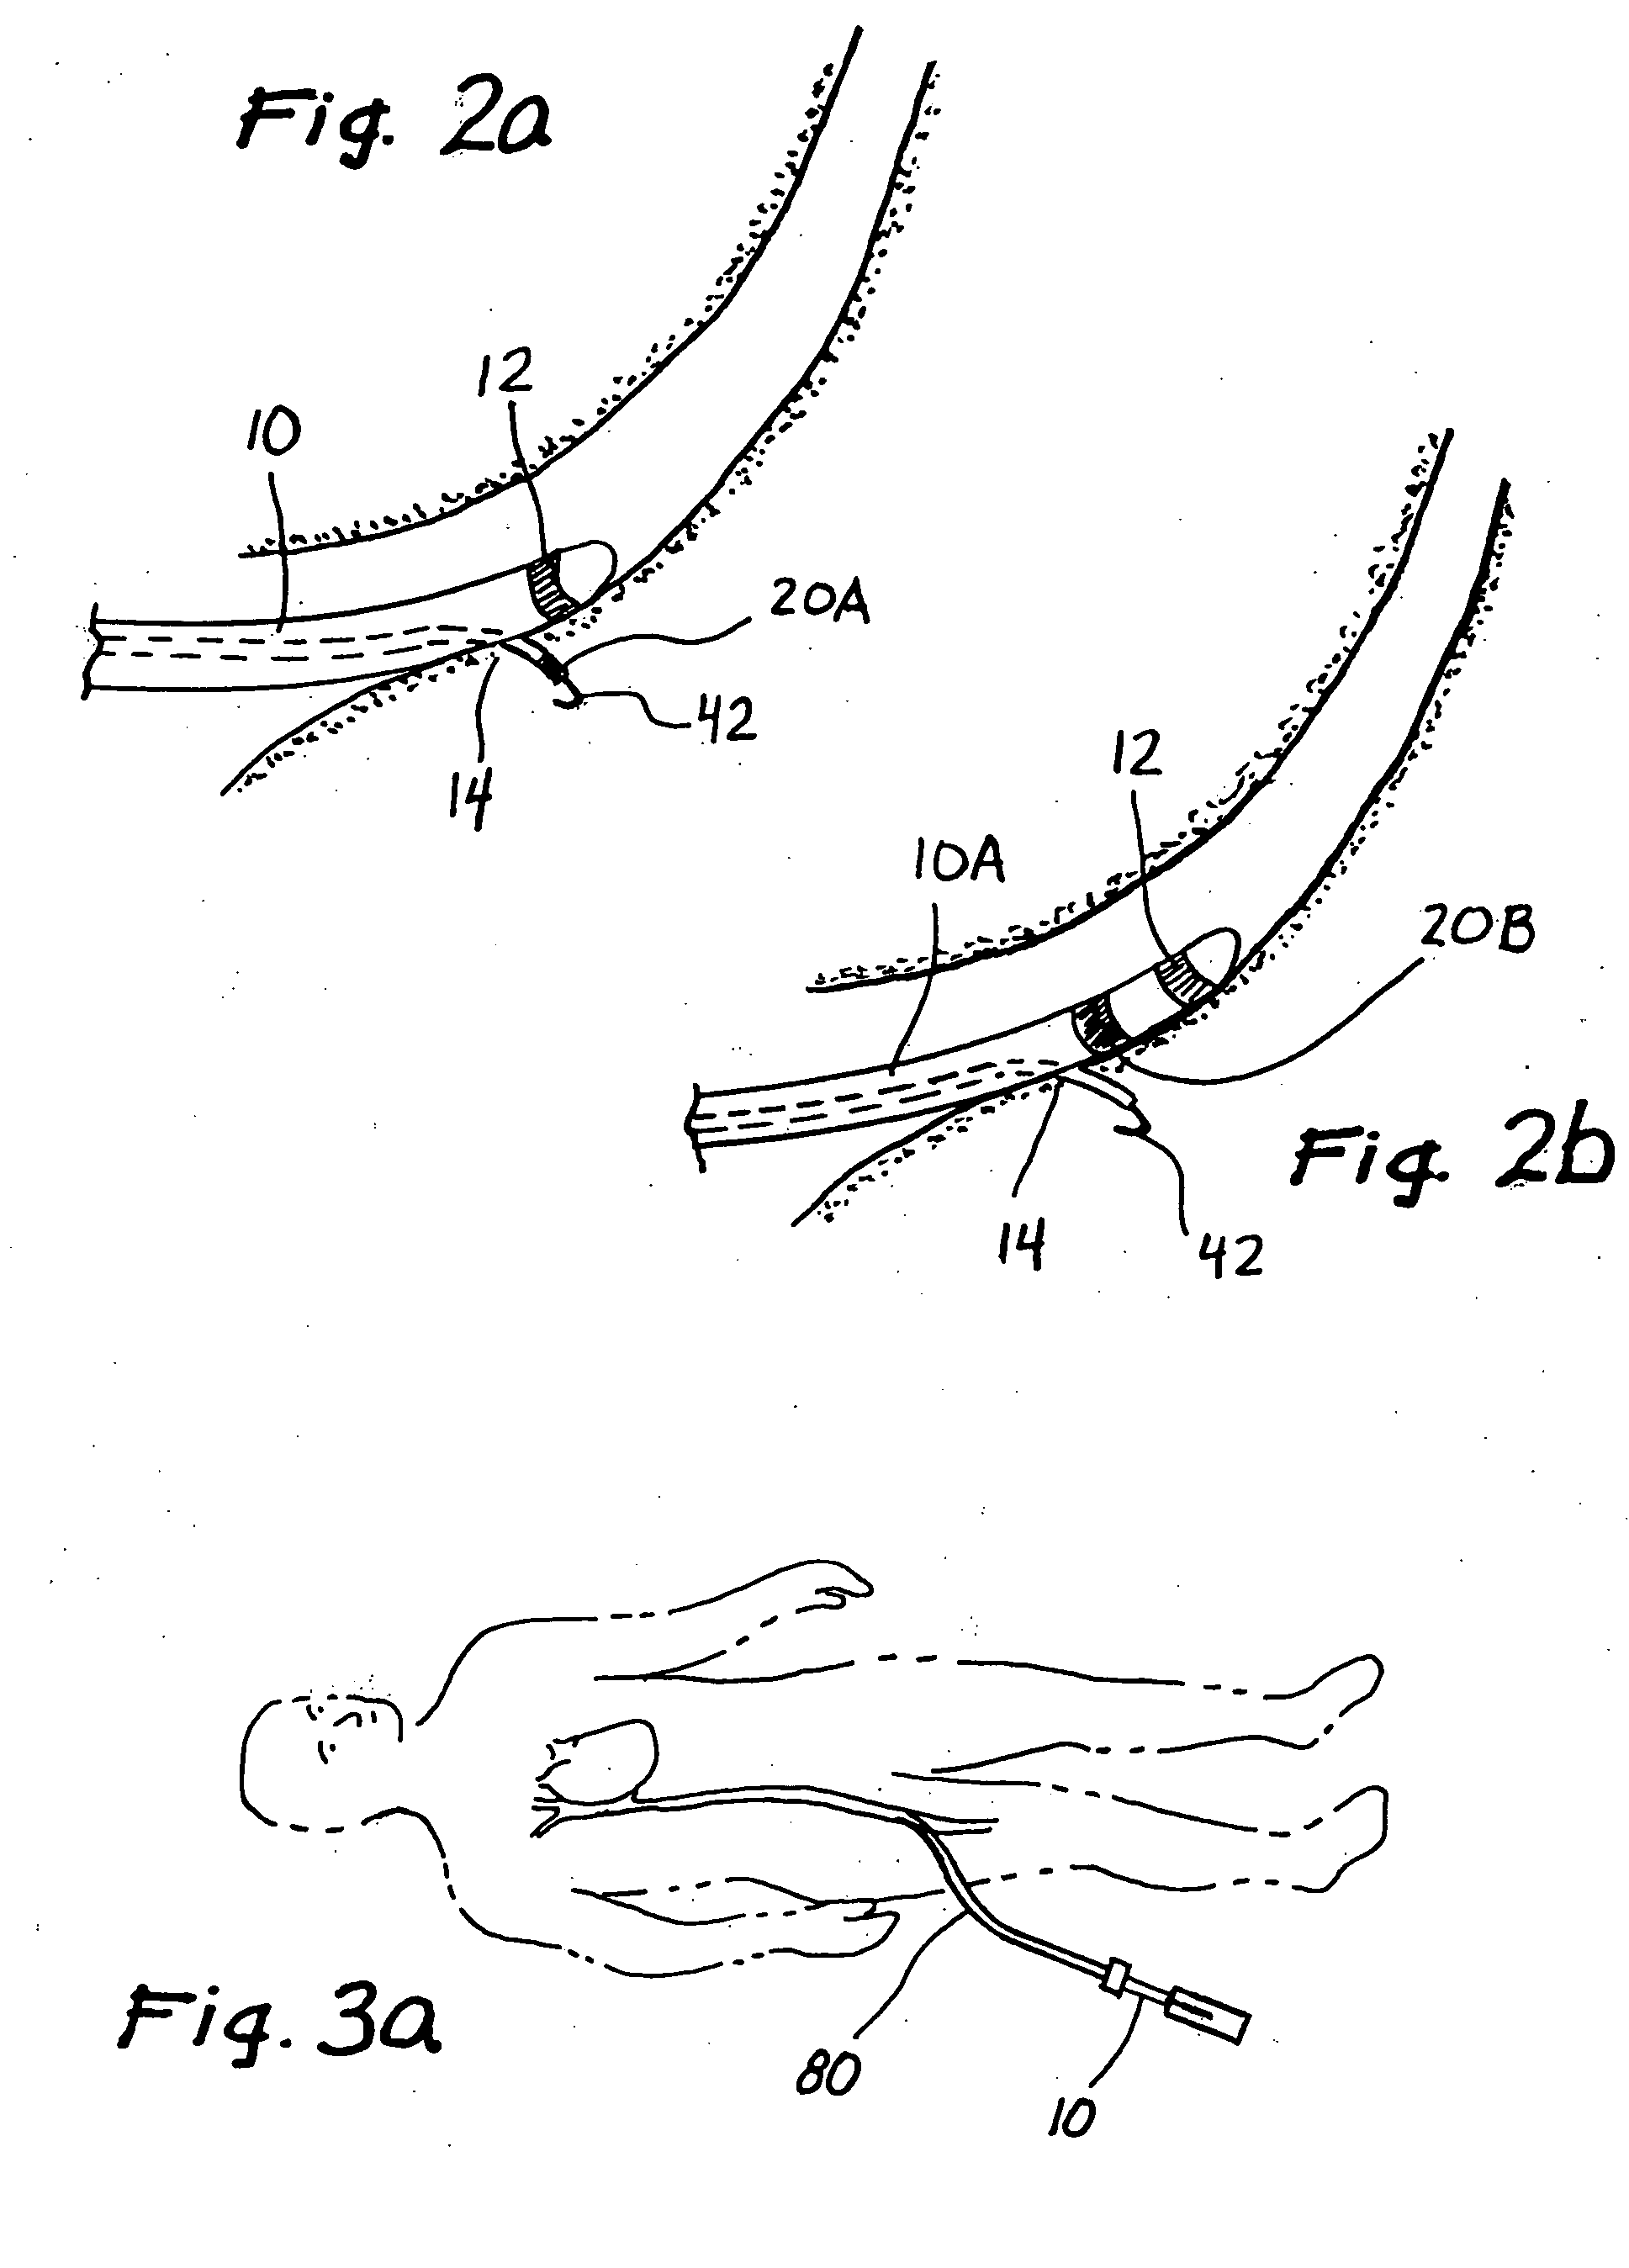 Devices and methods for transluminal or transthoracic interstitial electrode placement